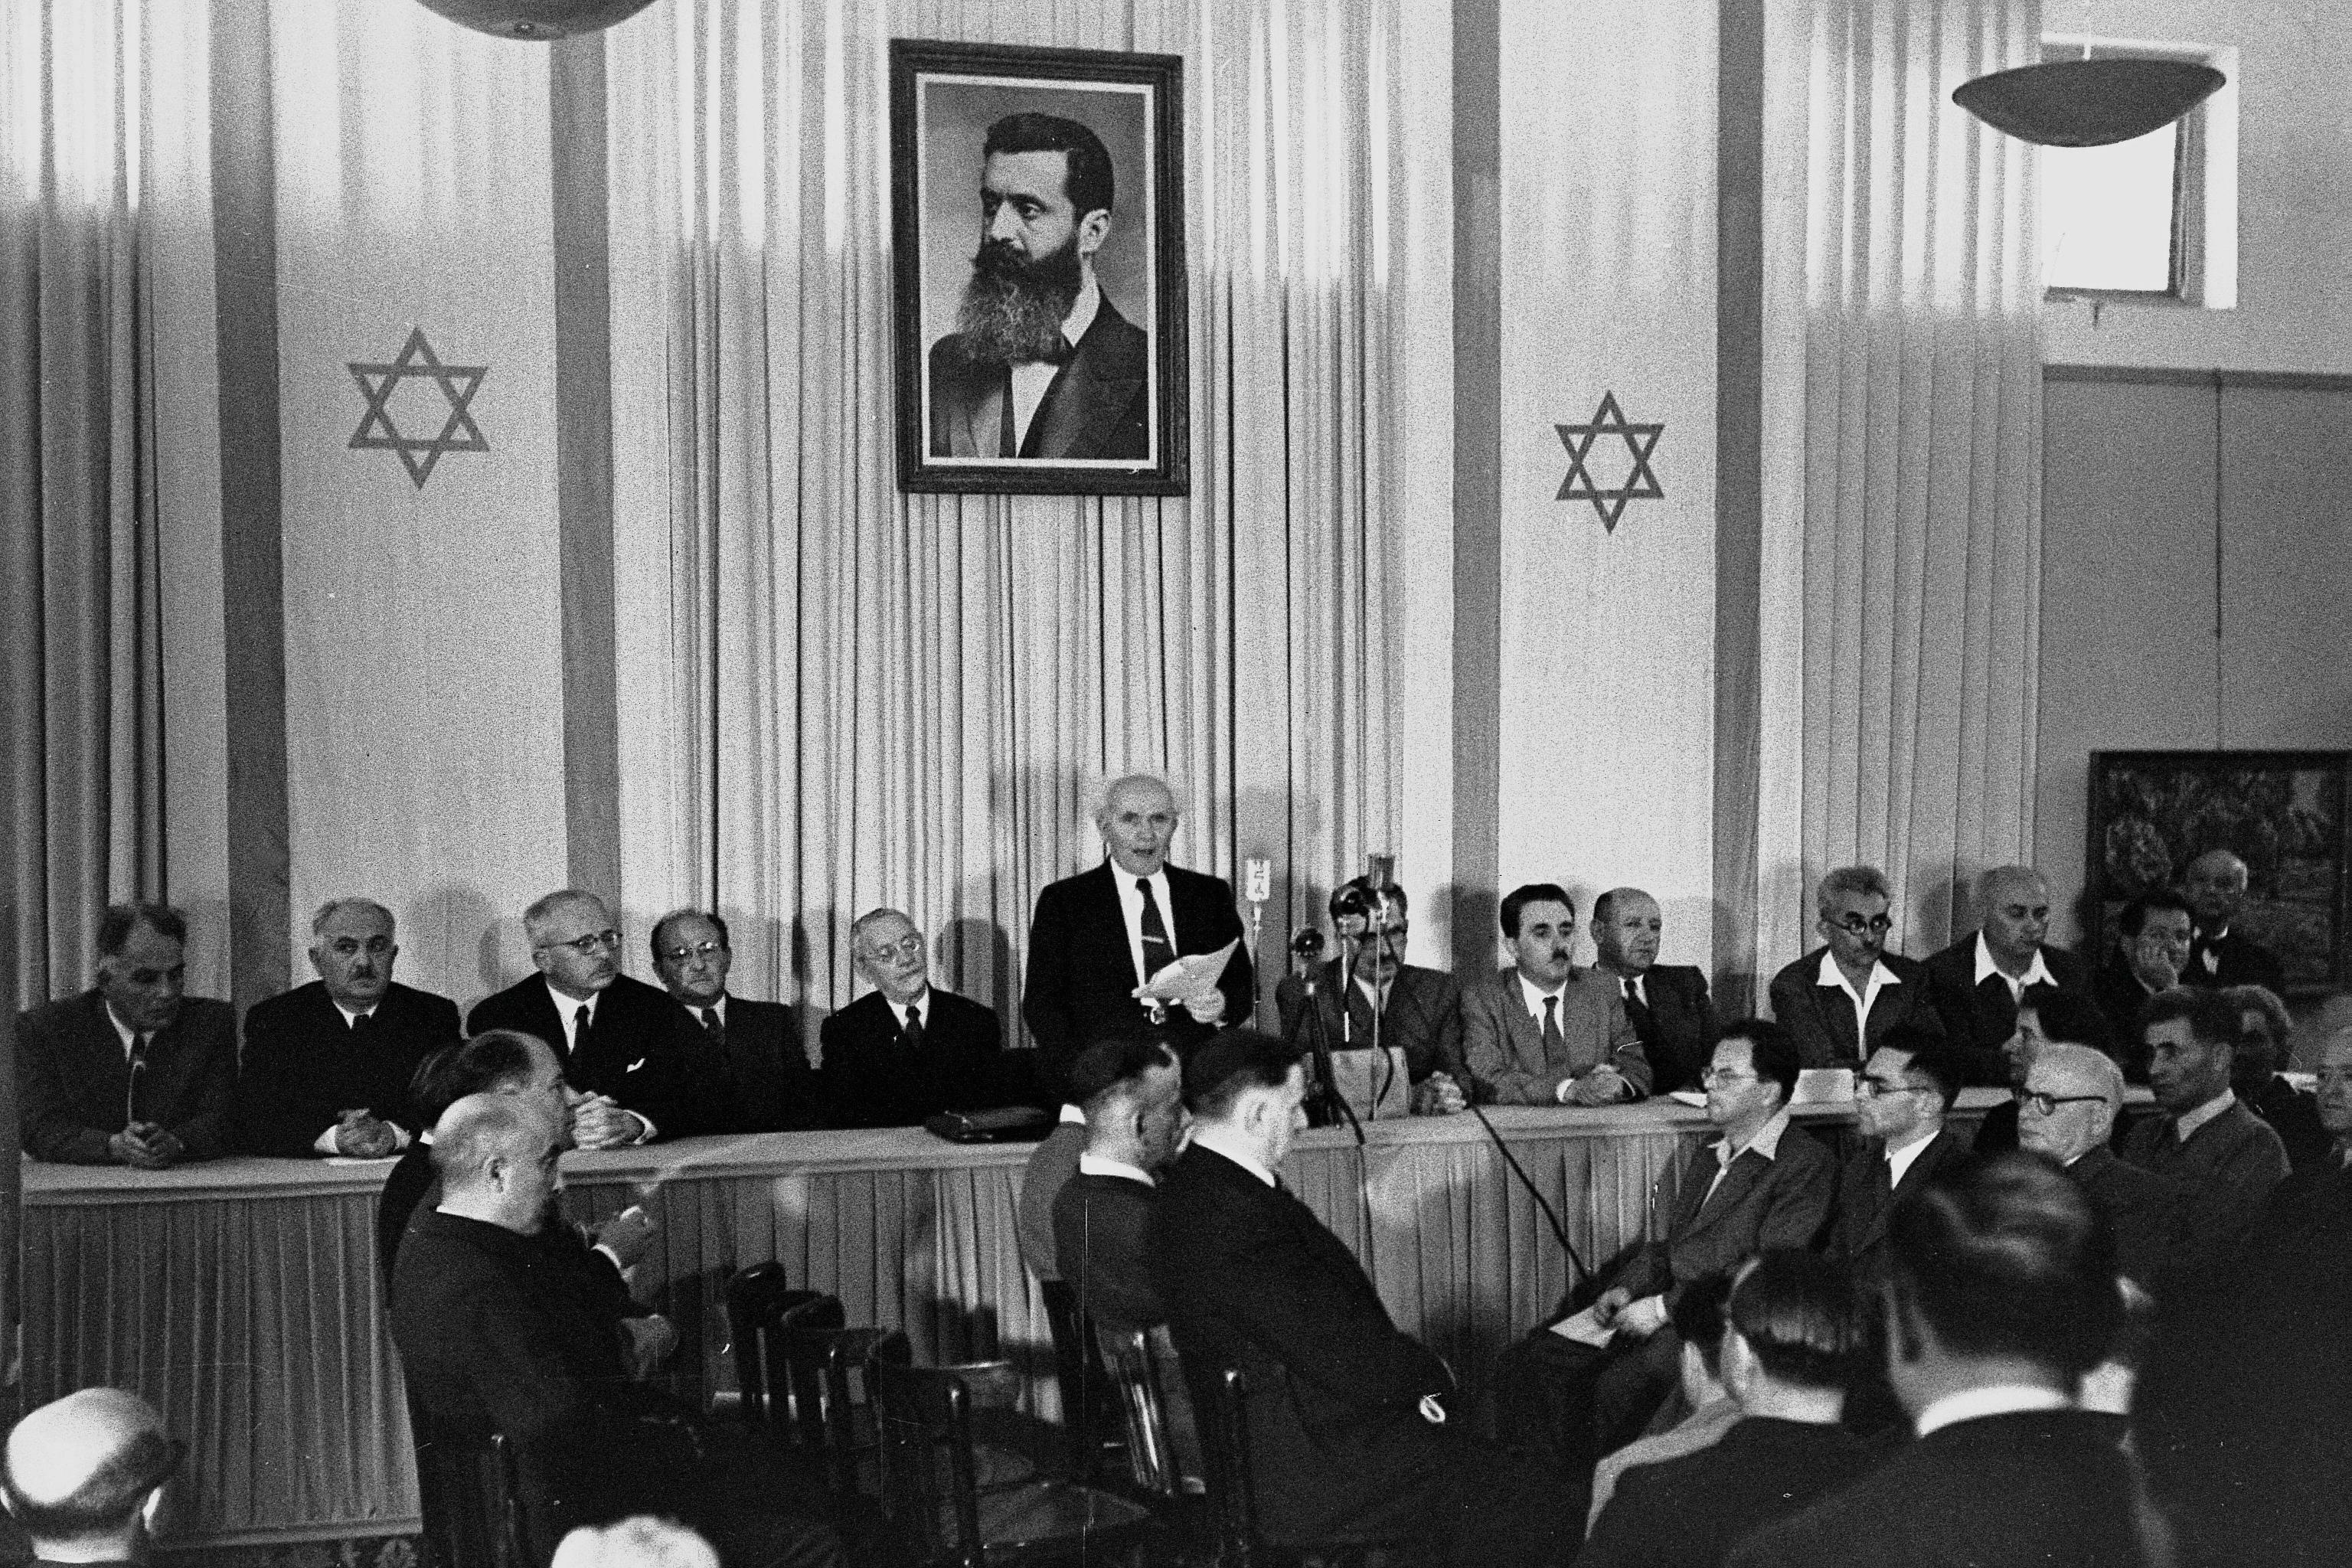 http://upload.wikimedia.org/wikipedia/commons/3/36/Declaration_of_State_of_Israel_1948.jpg